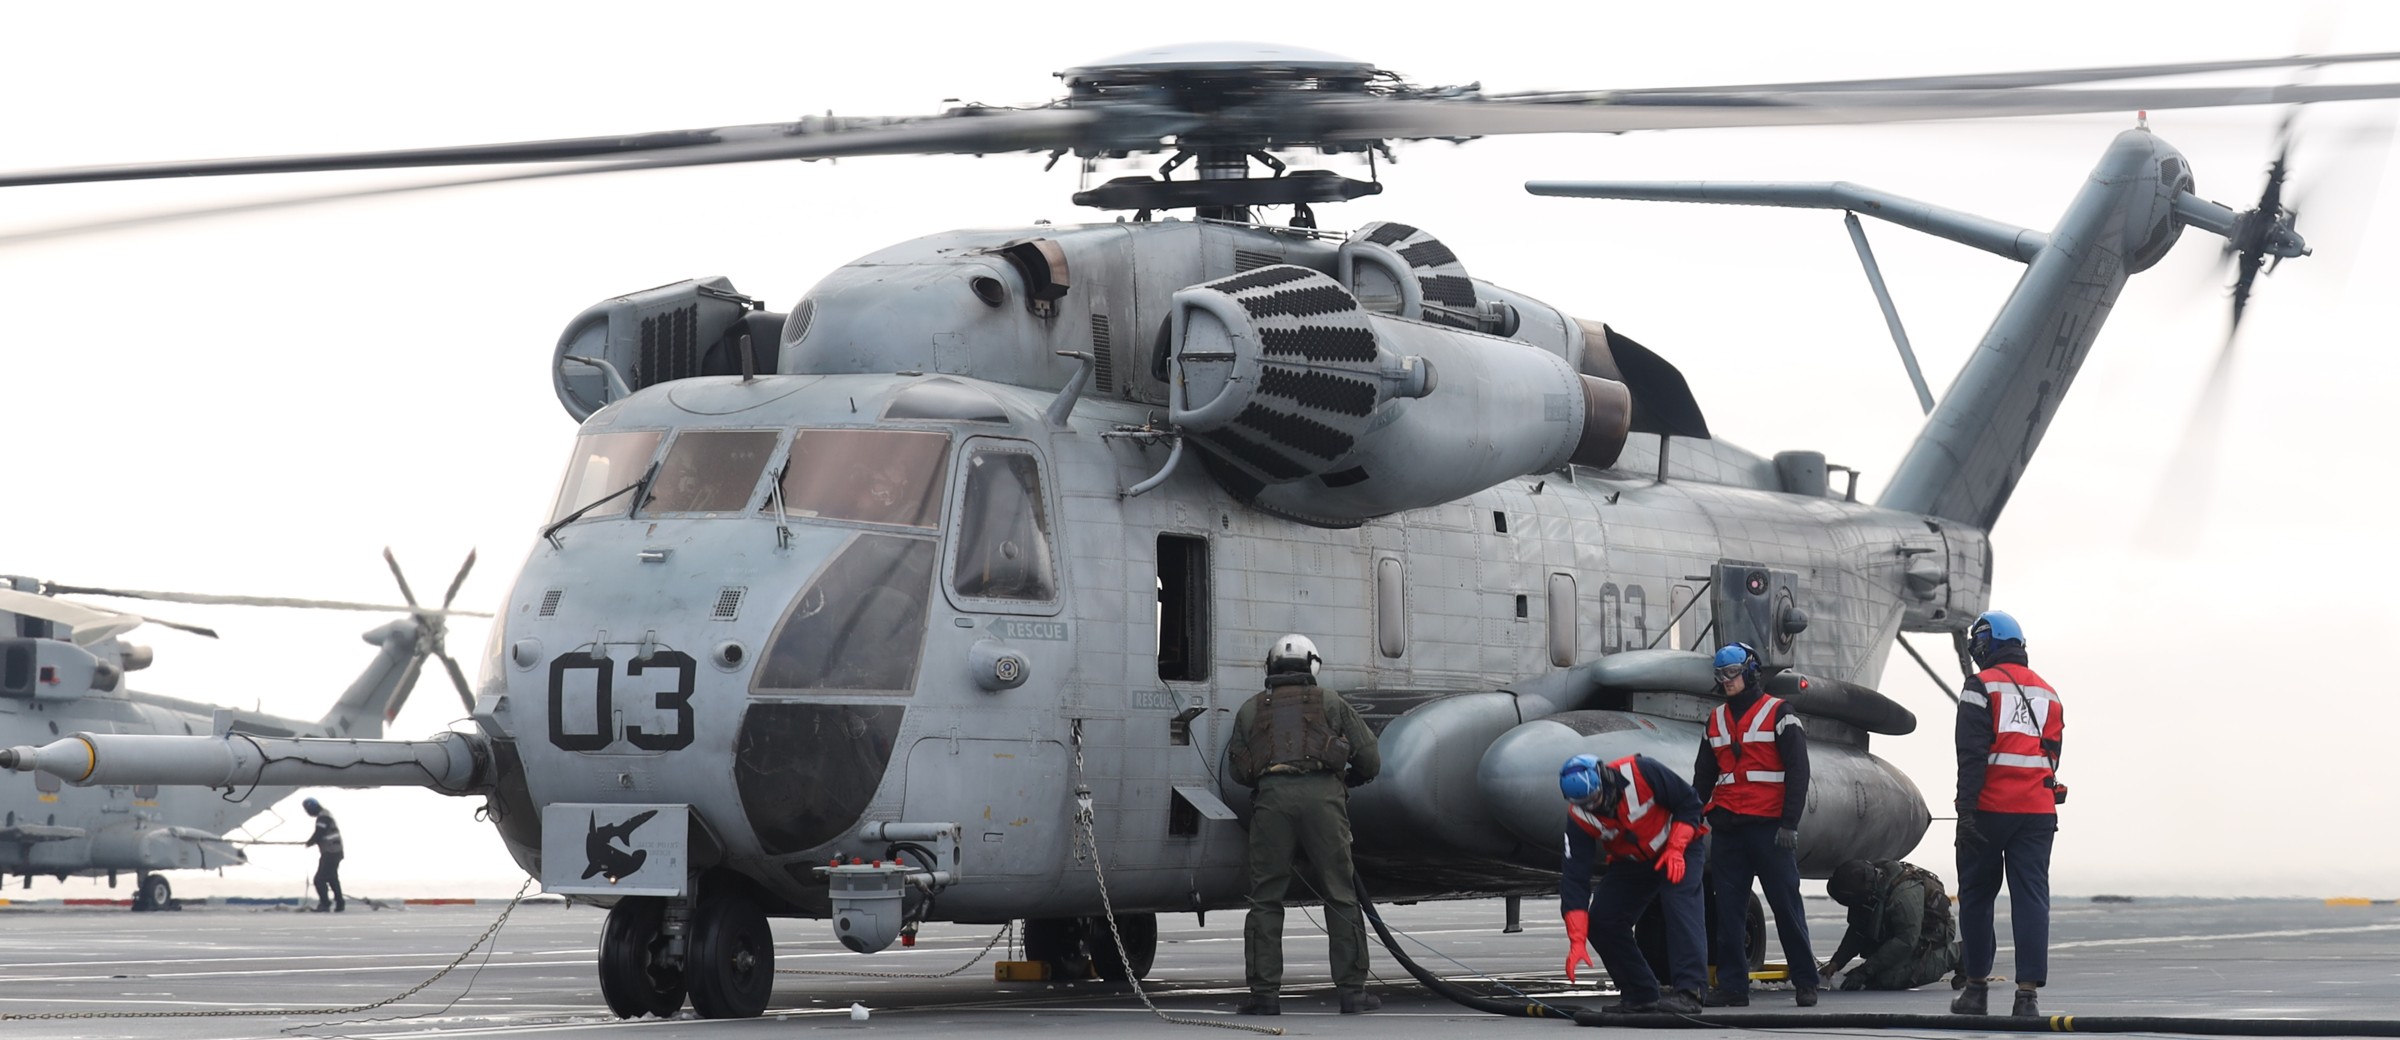 hmh-366 hammerheads ch-53e super stallion marine heavy helicopter squadron r09 hms prince of wales 164